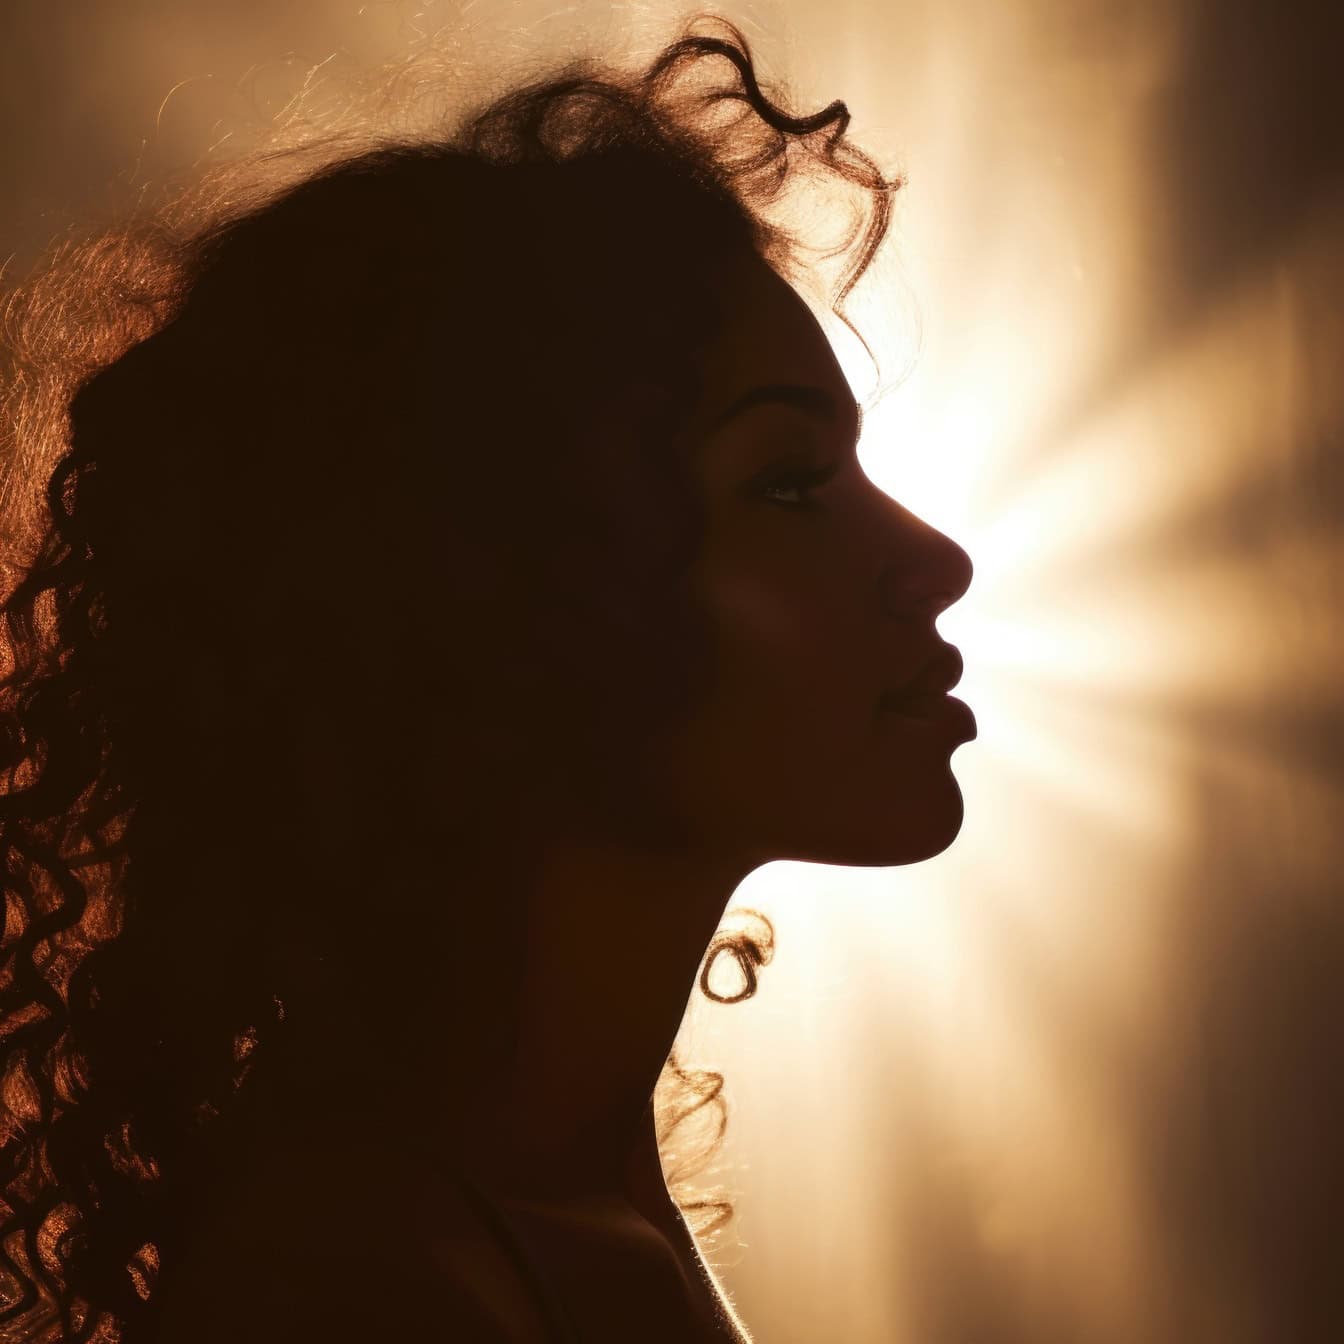 Profile of a silhouette of a woman with the sun shining through her hair